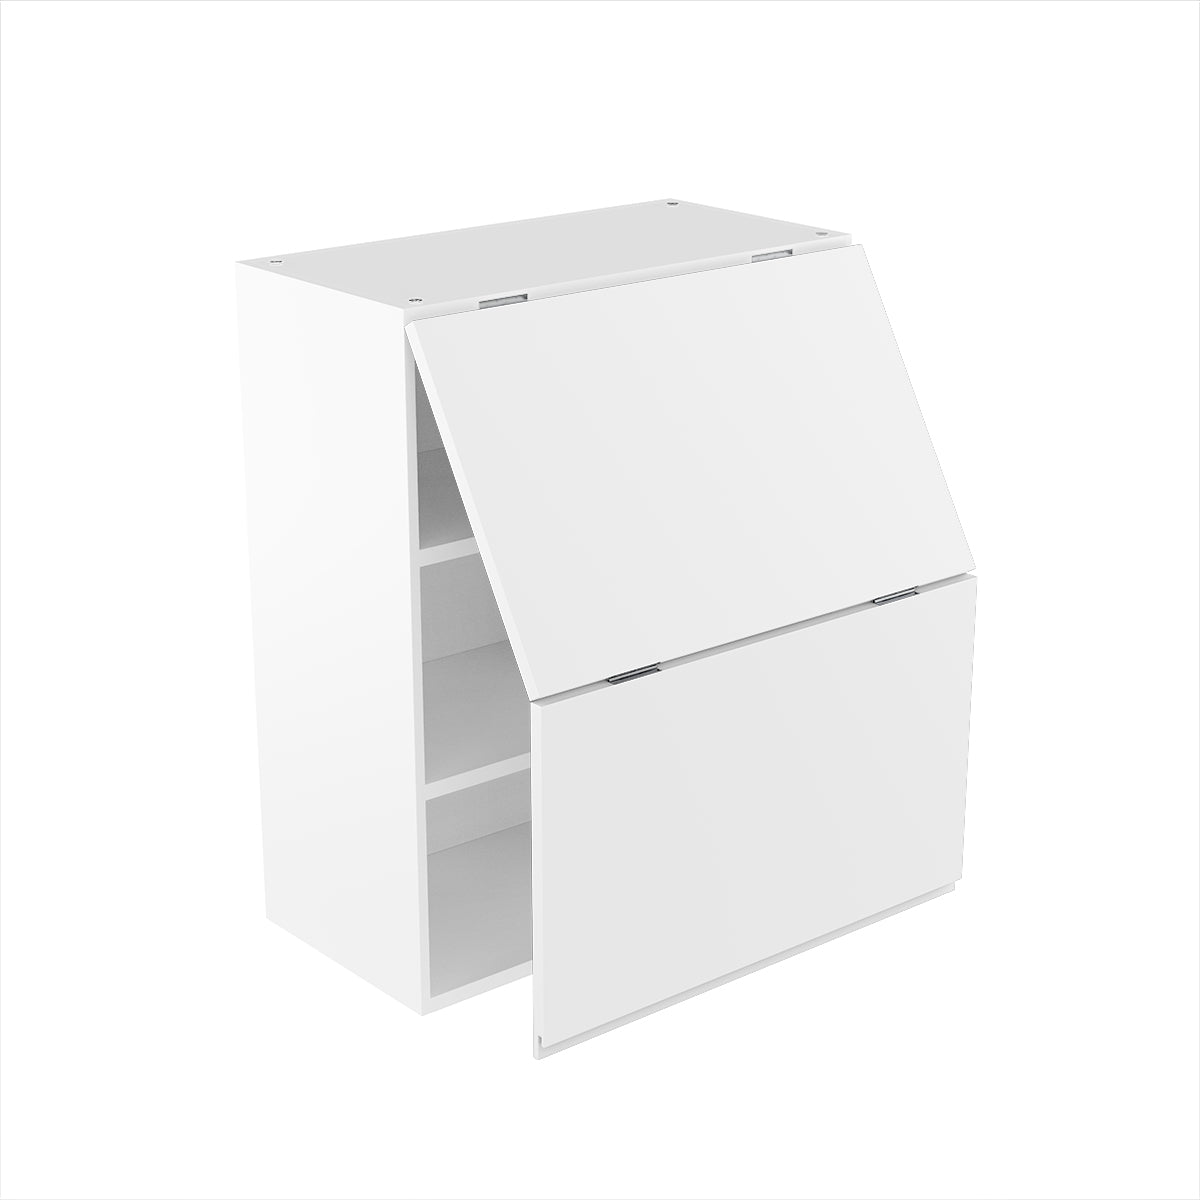 Wall Cabinet - RTA - Lacquer White - Bi-Fold Door Wall Cabinet | 24"W x 30"H x 12"D